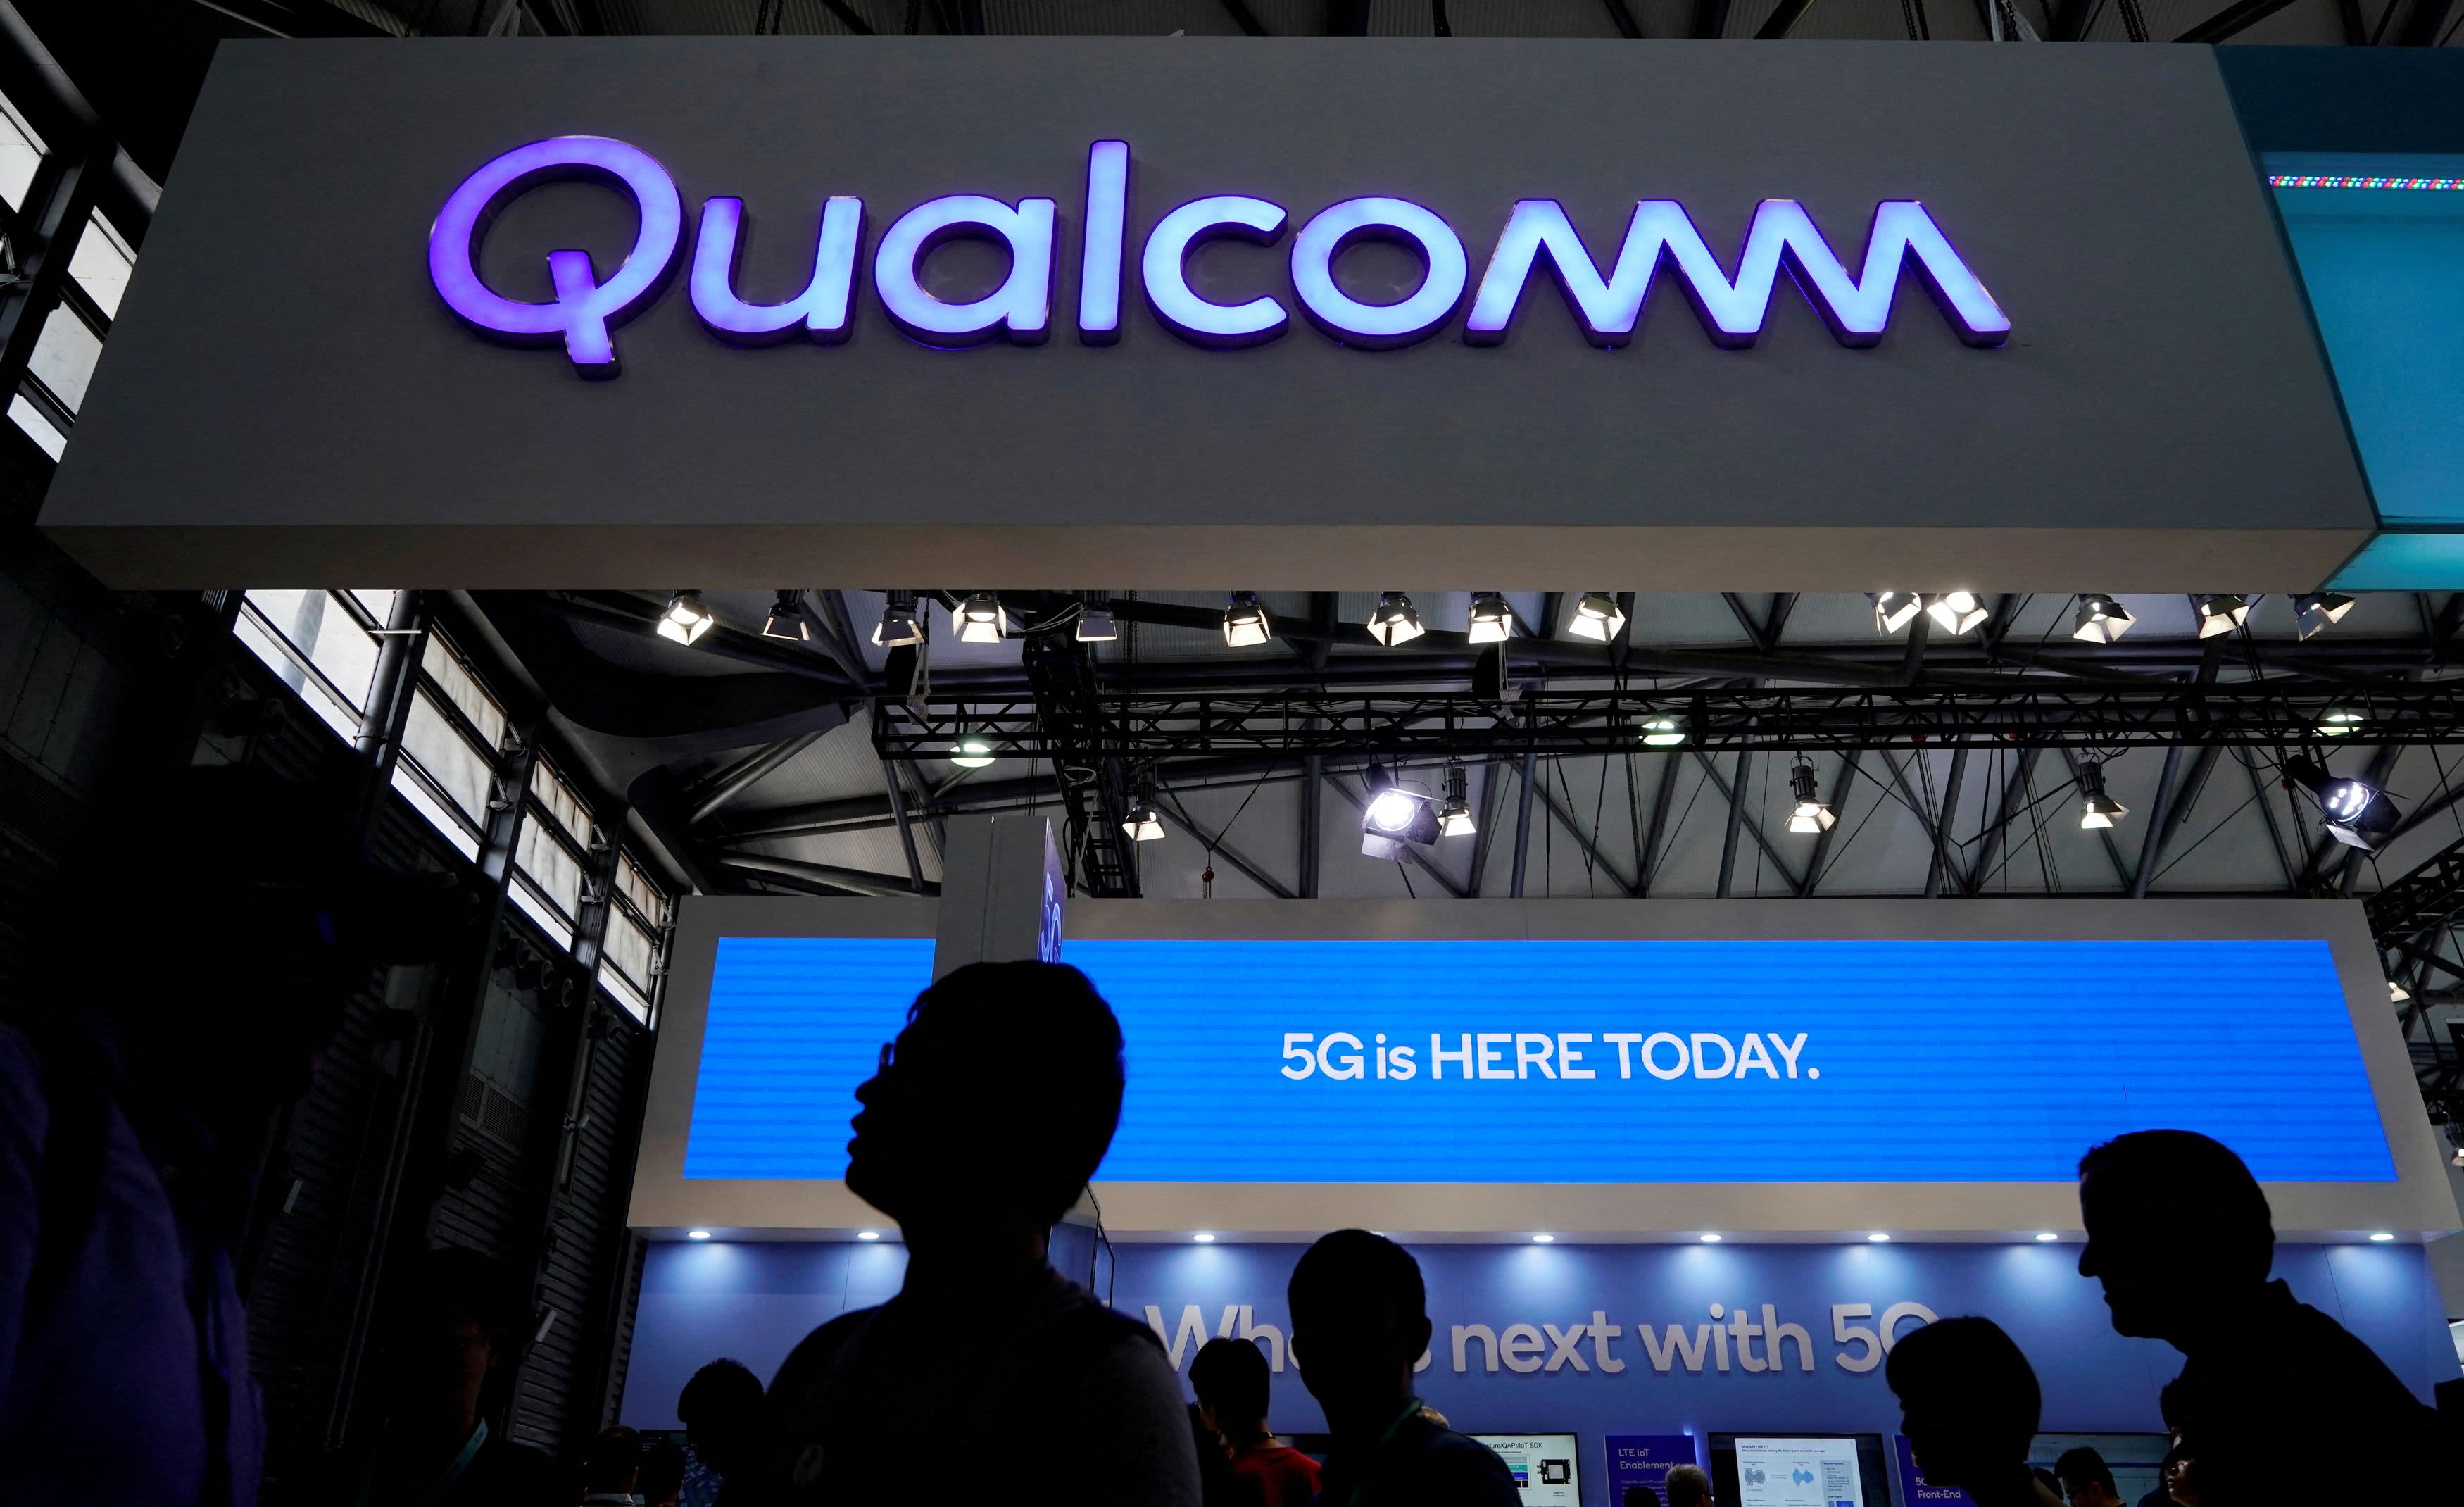 Qualcomm is a top semiconductor pick with nearly 20% upside, Credit Suisse says